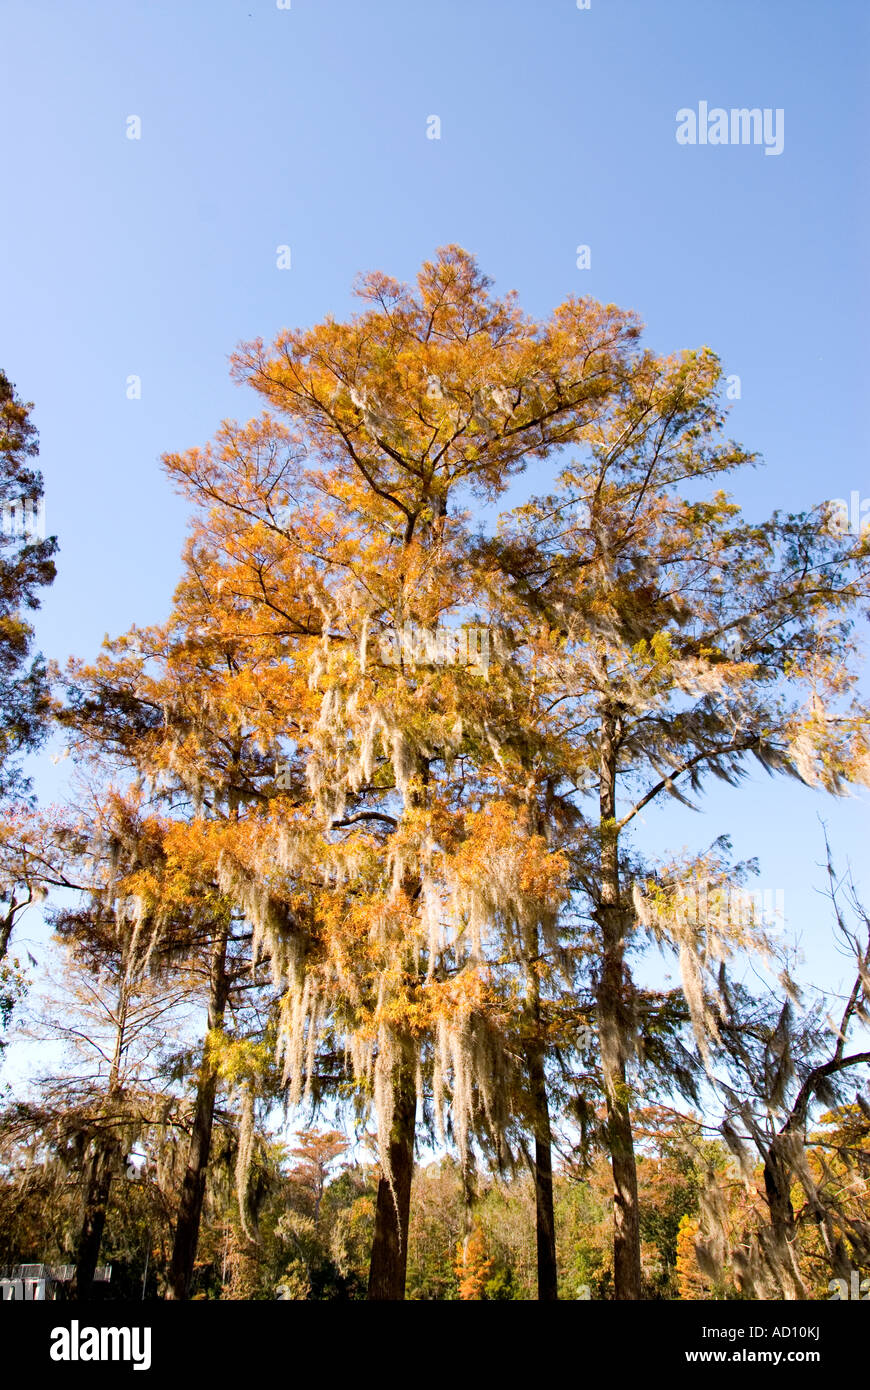 Spanish moss hanging from bald cypress tree orange autumn leaves fall colors american south southern usa iconic image Stock Photo